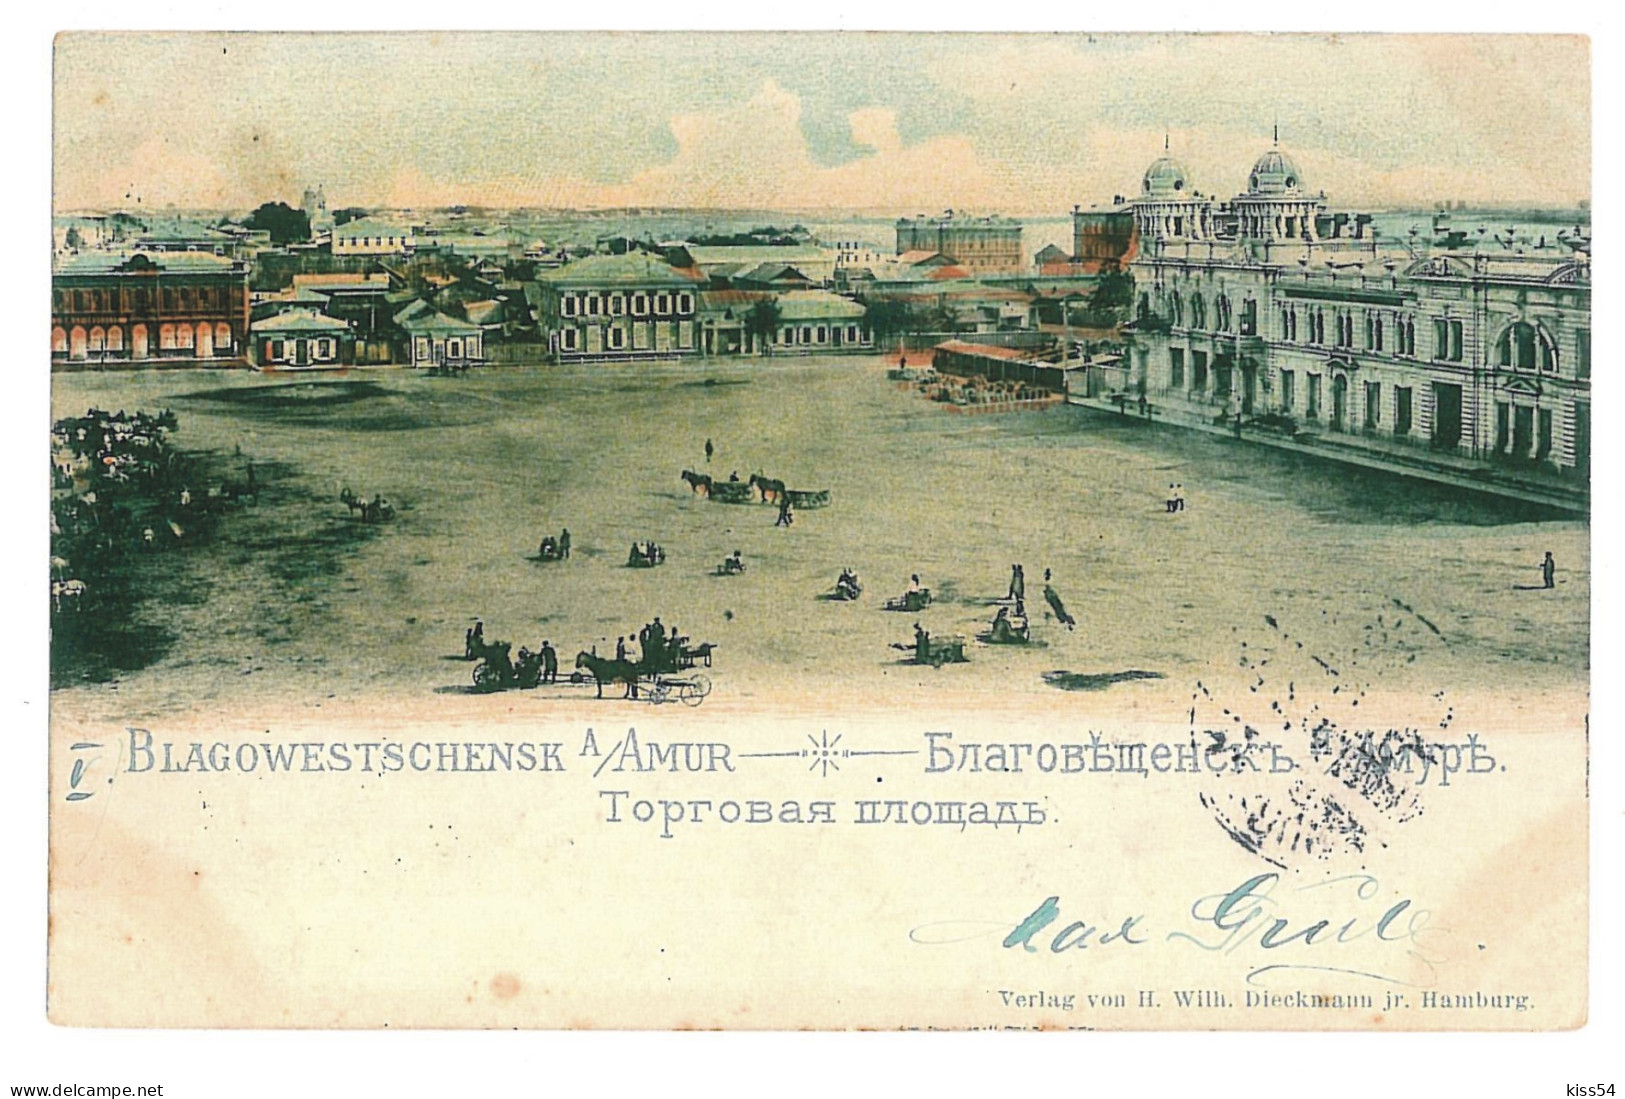 RUS 54 - 9856 BLAGOWESTSCCHENSK AMUR, Russia, Litho, Market - Old Postcard - Used - 1901 - Rusia